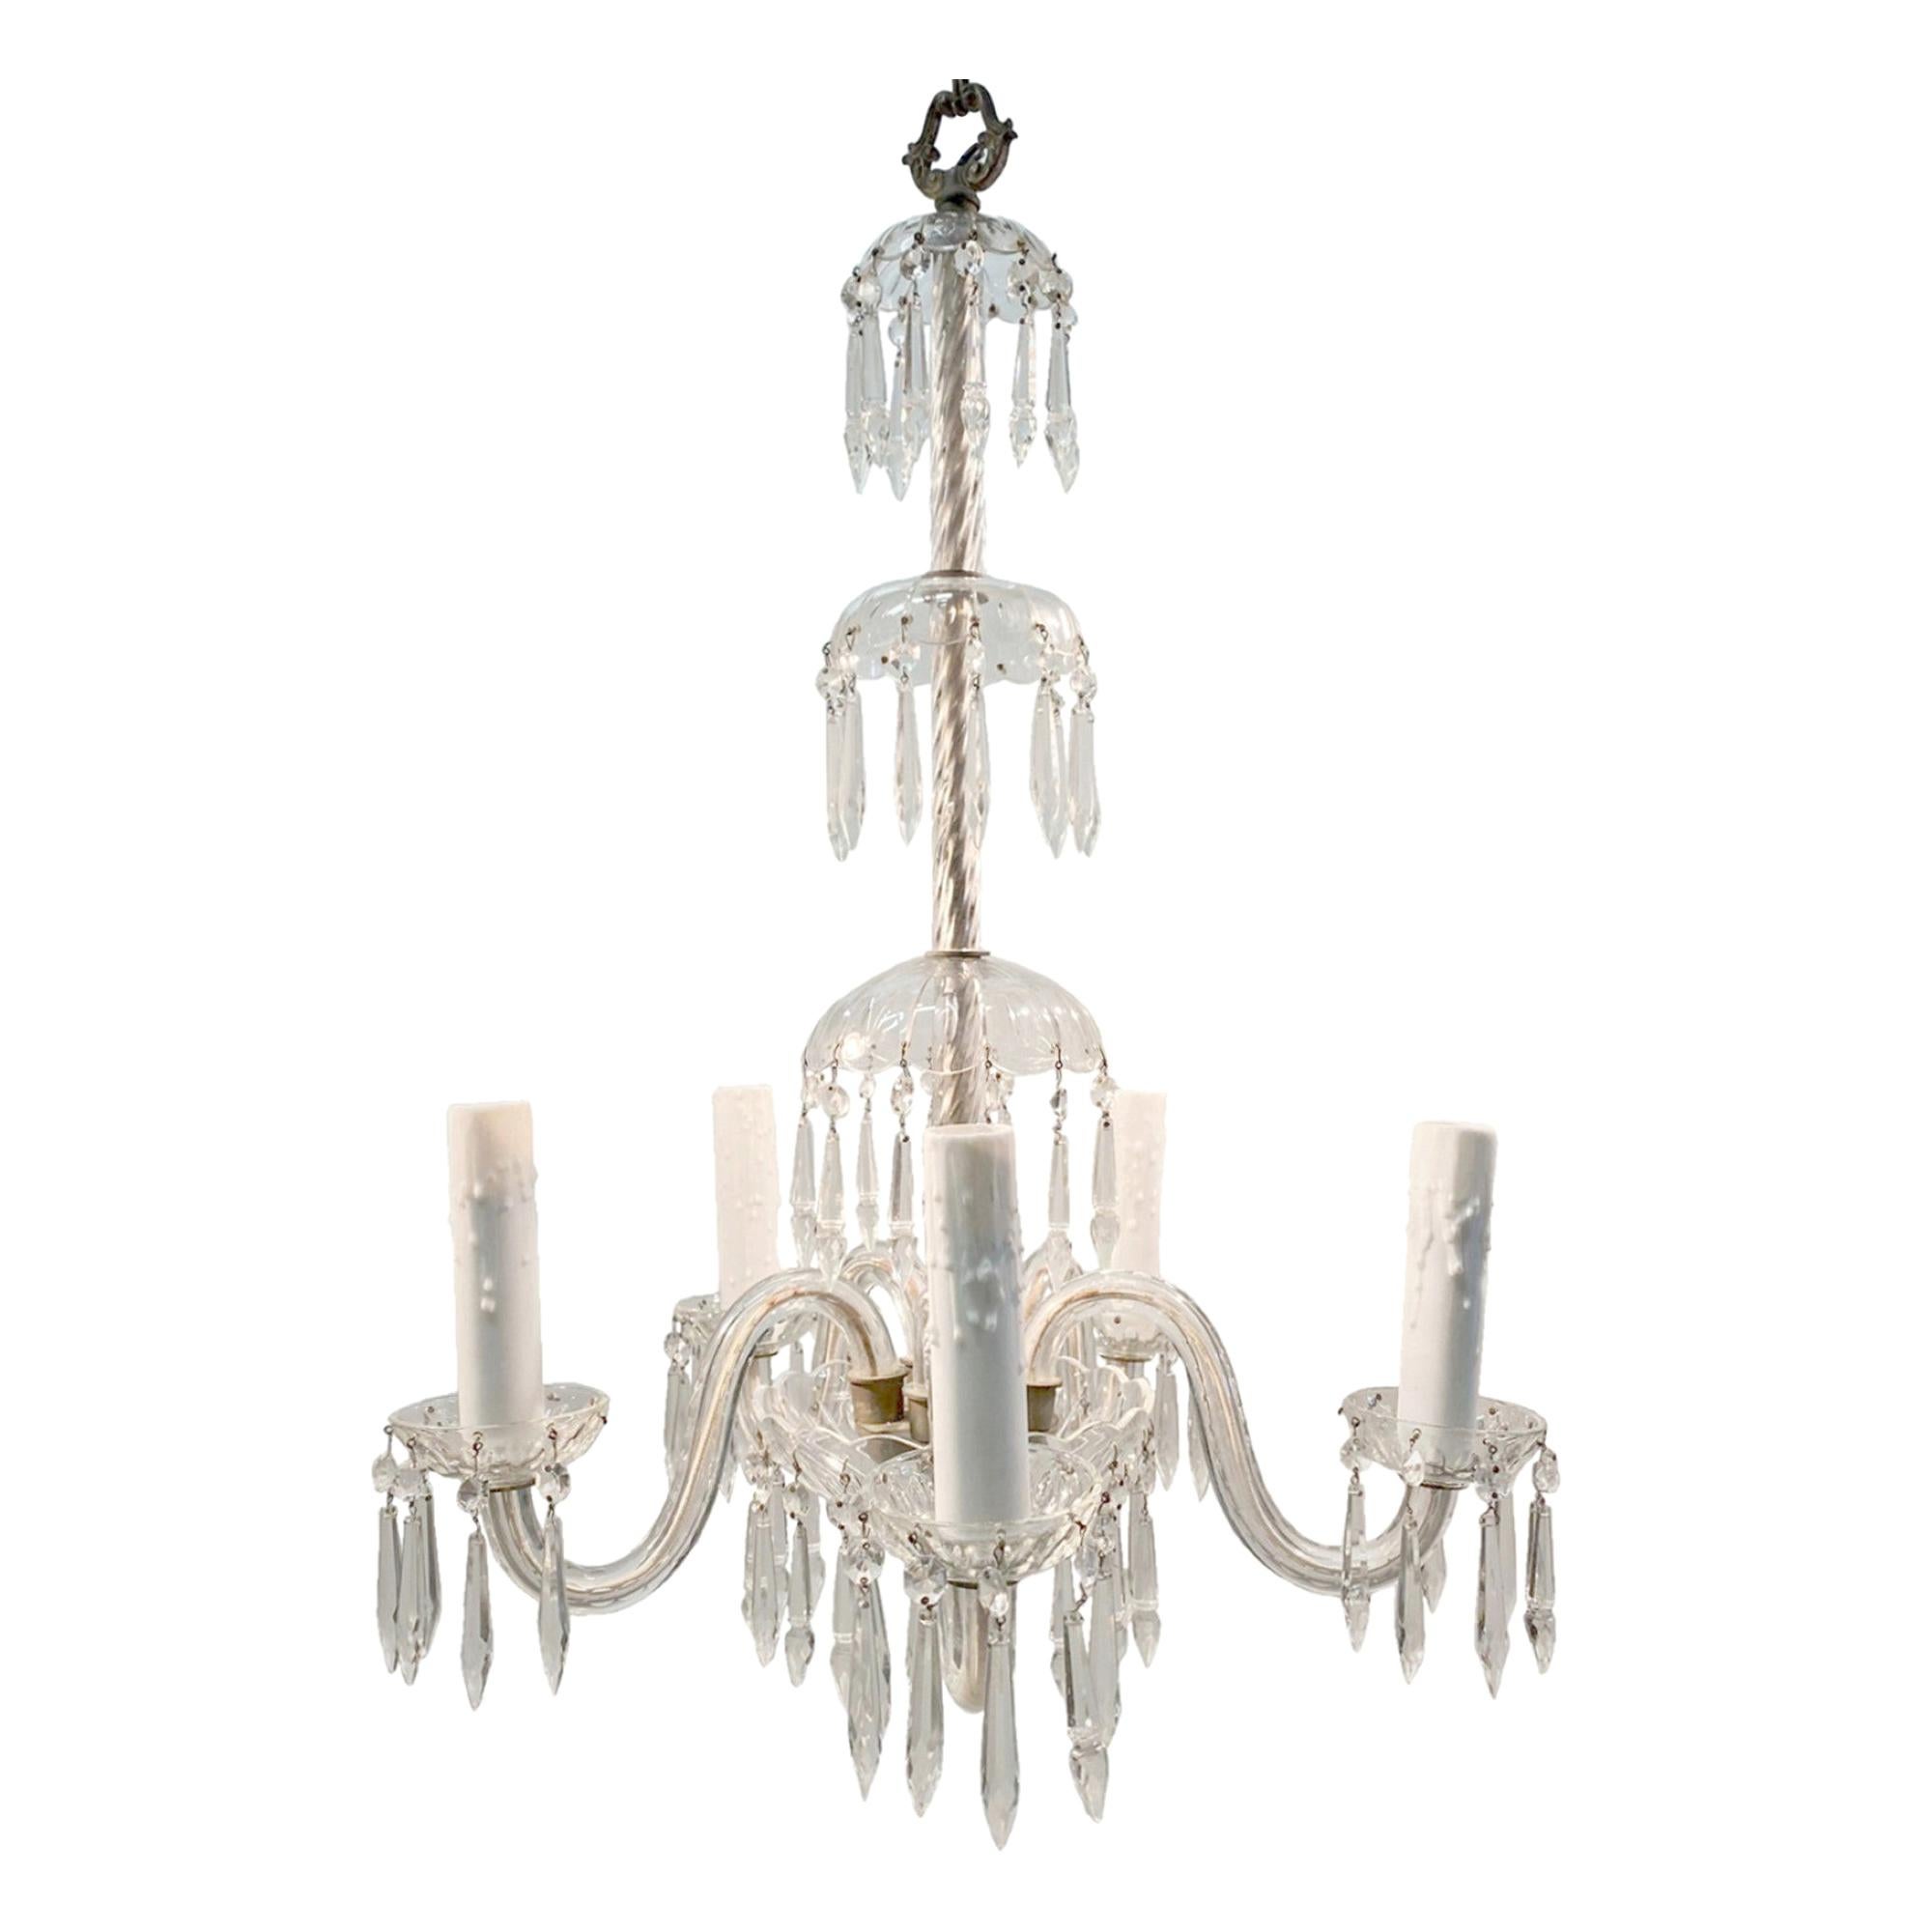 1920s Crystal Chandelier with 5 Arms and Long Crystals